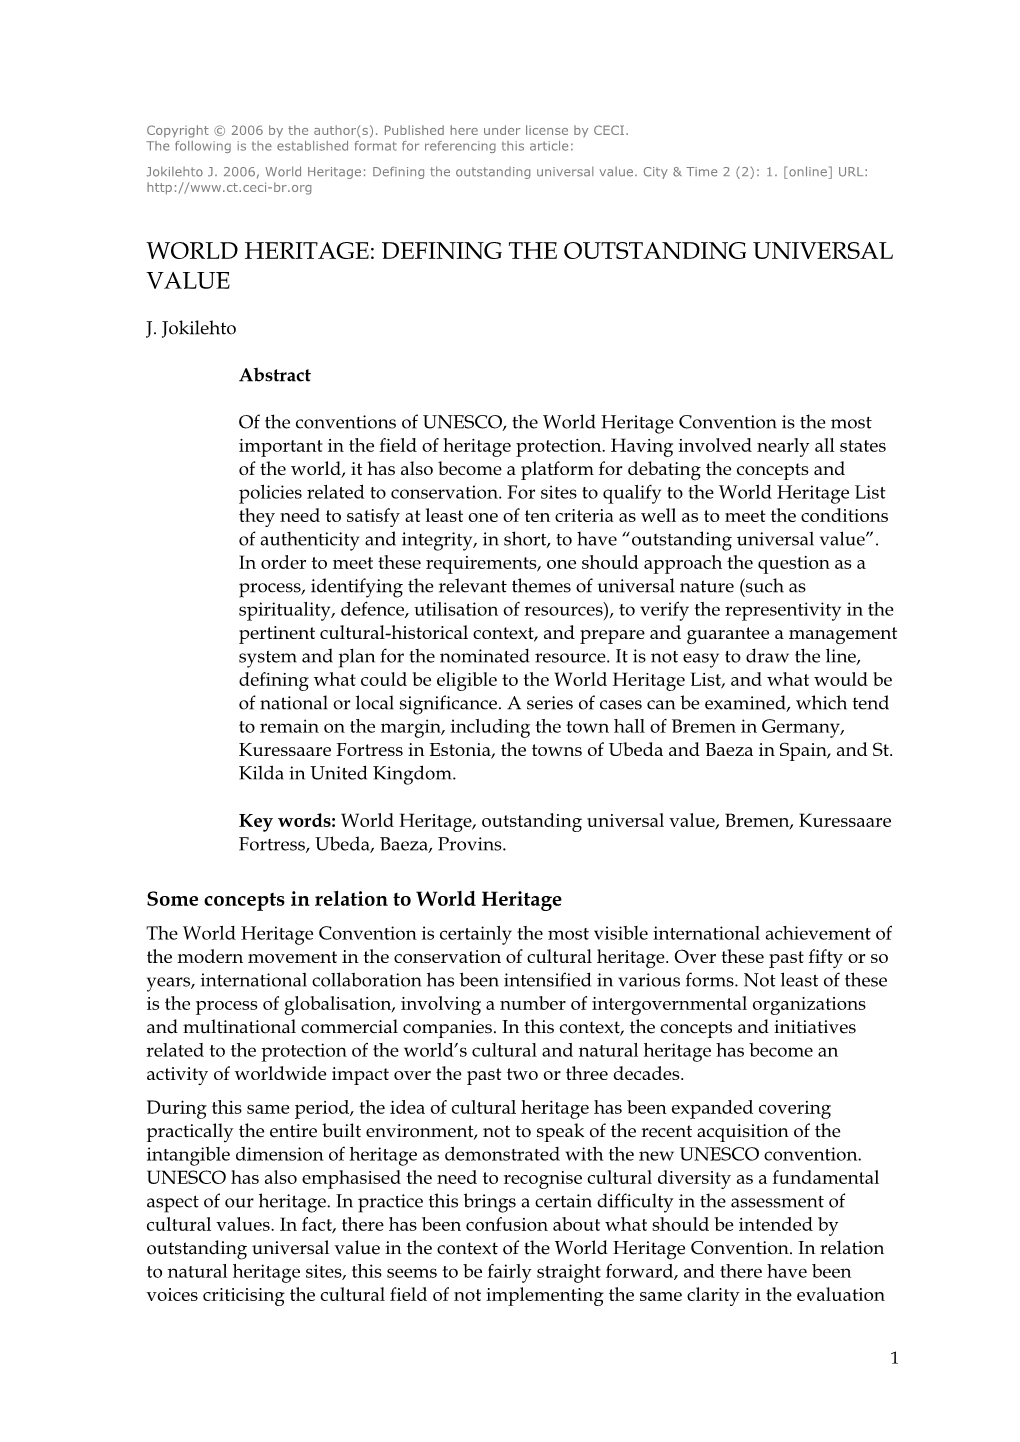 World Heritage: Defining the Outstanding Universal Value